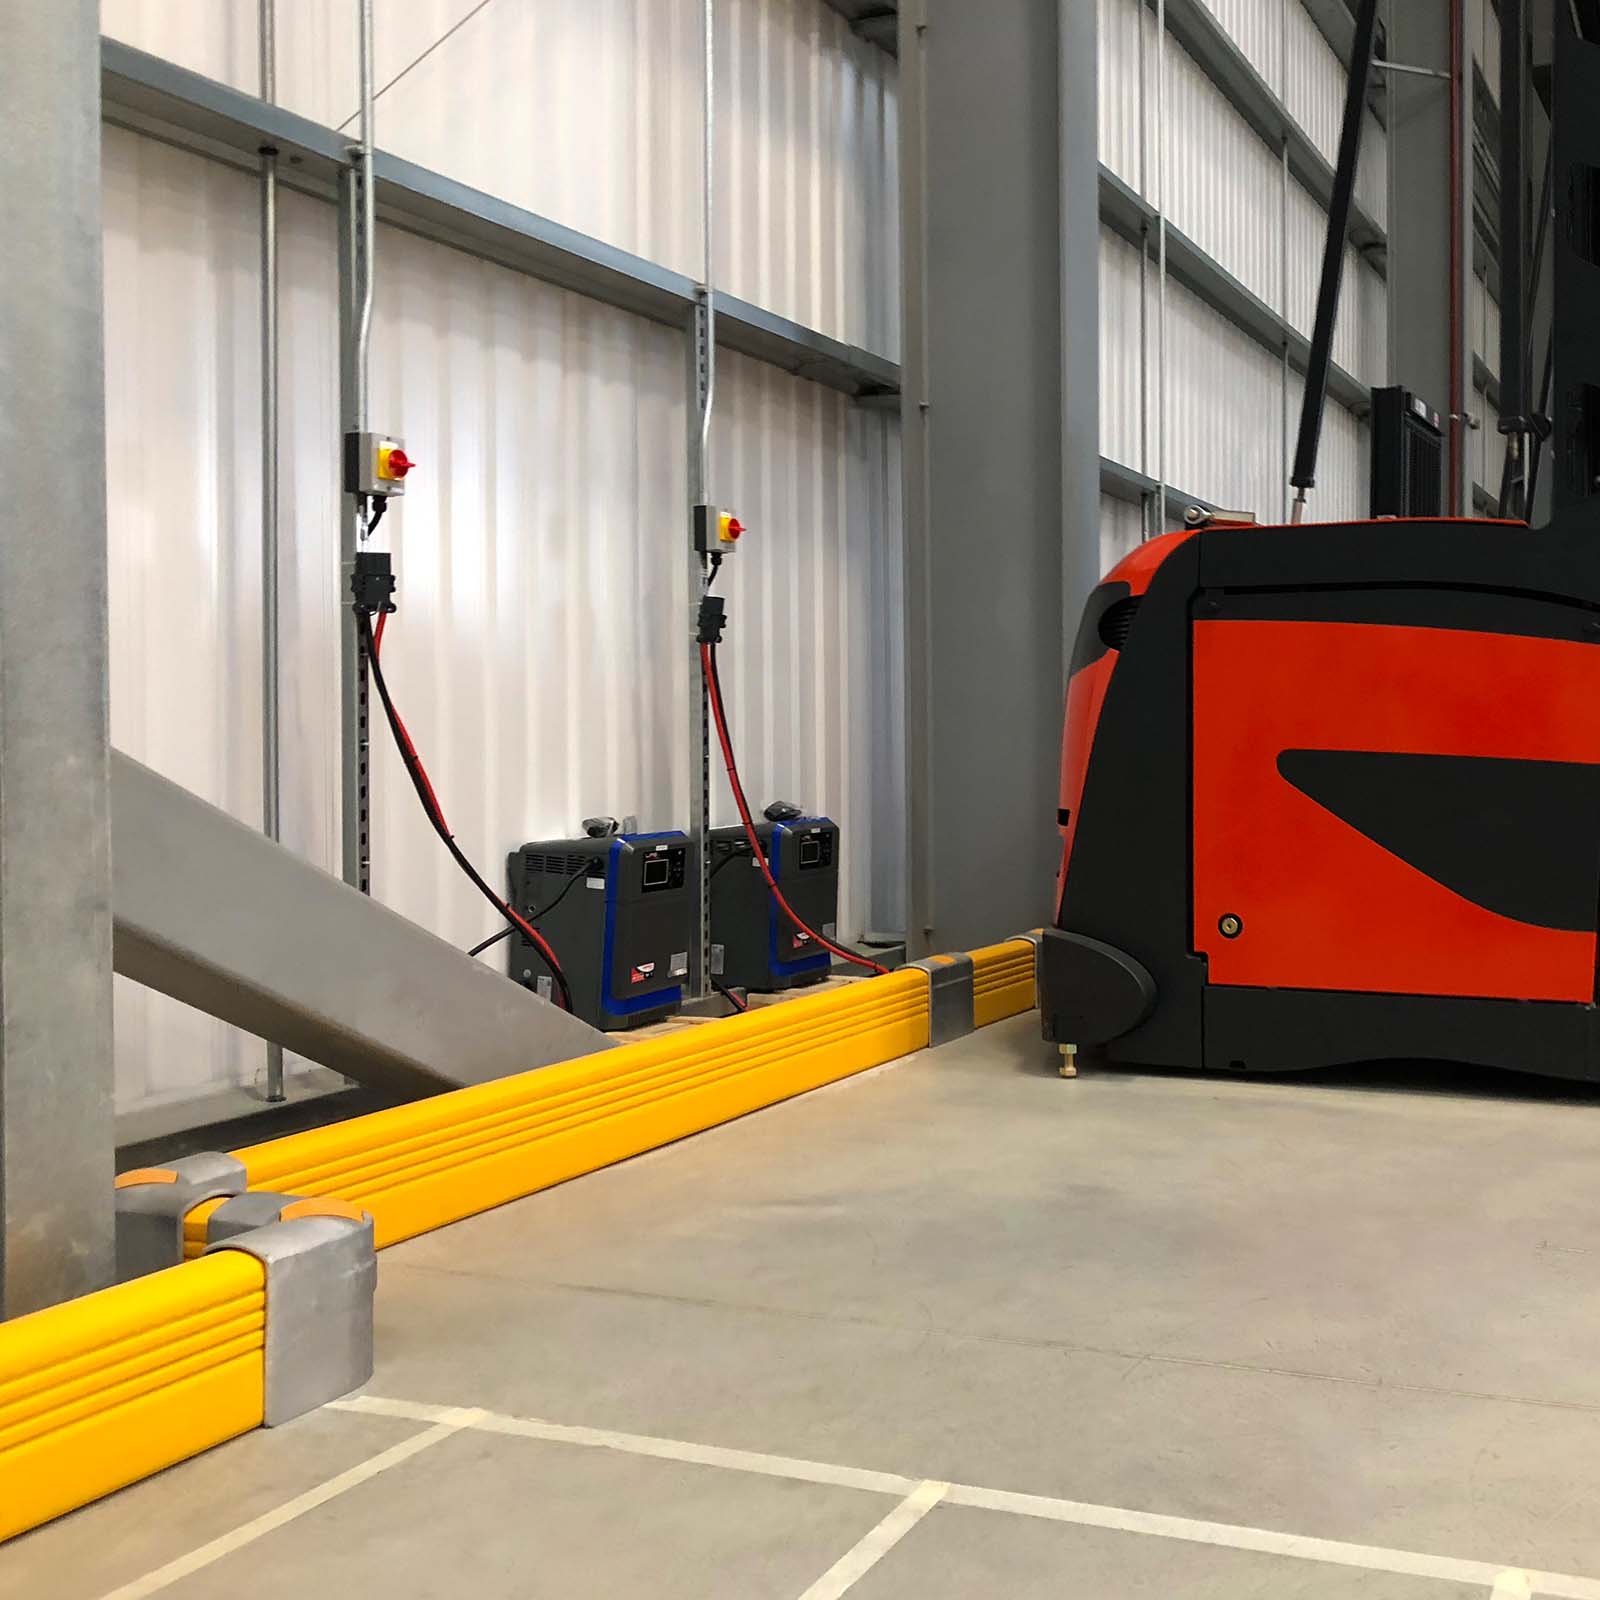 McCue Crash Barrier Safety Protection in warehouse